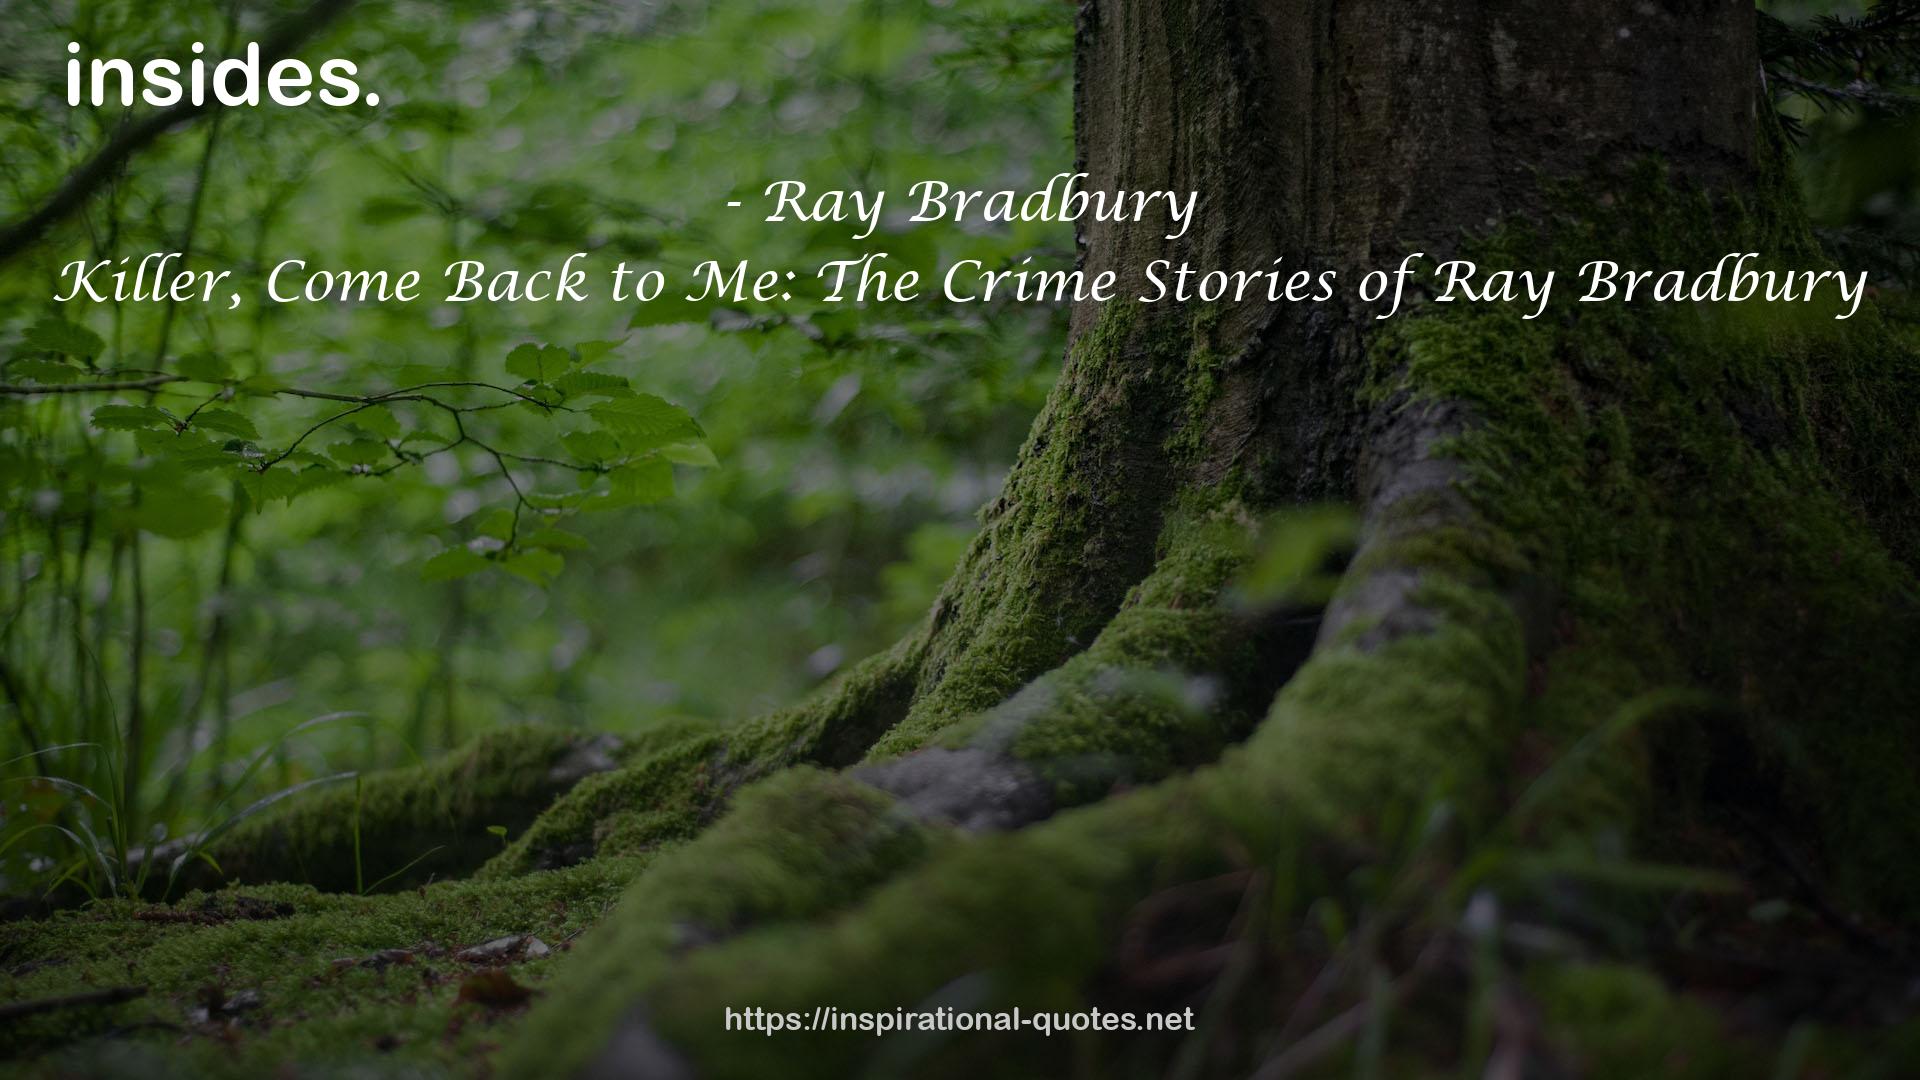 Killer, Come Back to Me: The Crime Stories of Ray Bradbury QUOTES